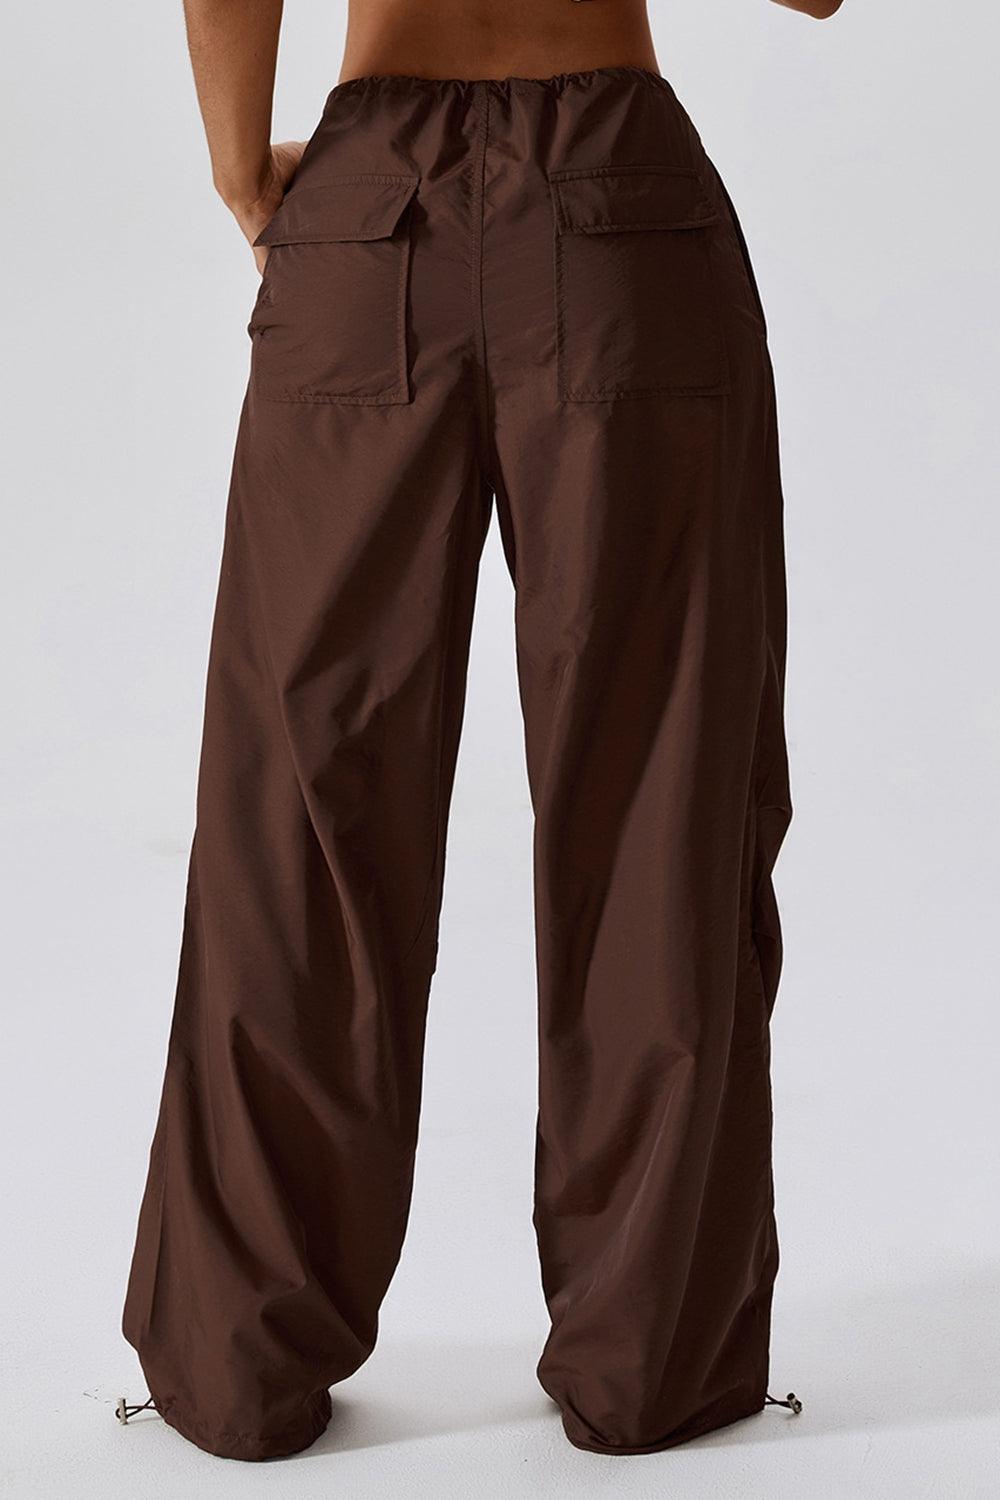 Long Loose Fit Pocketed Sports Pants - Olive Ave